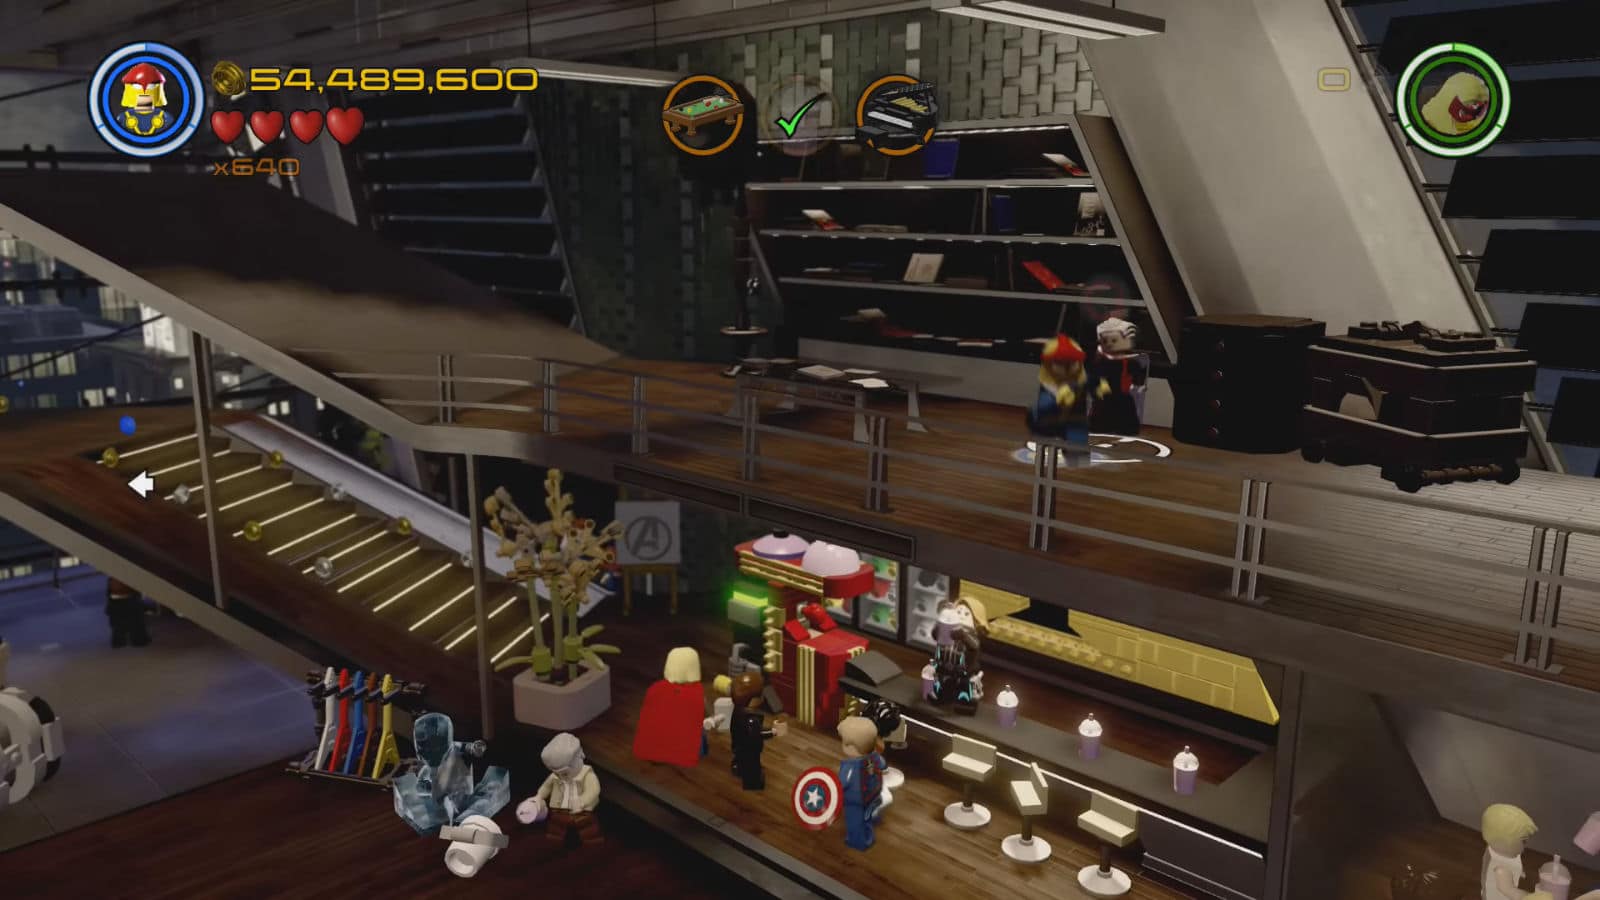 Lego Marvel's Avengers The Collector Vinyl Record Location